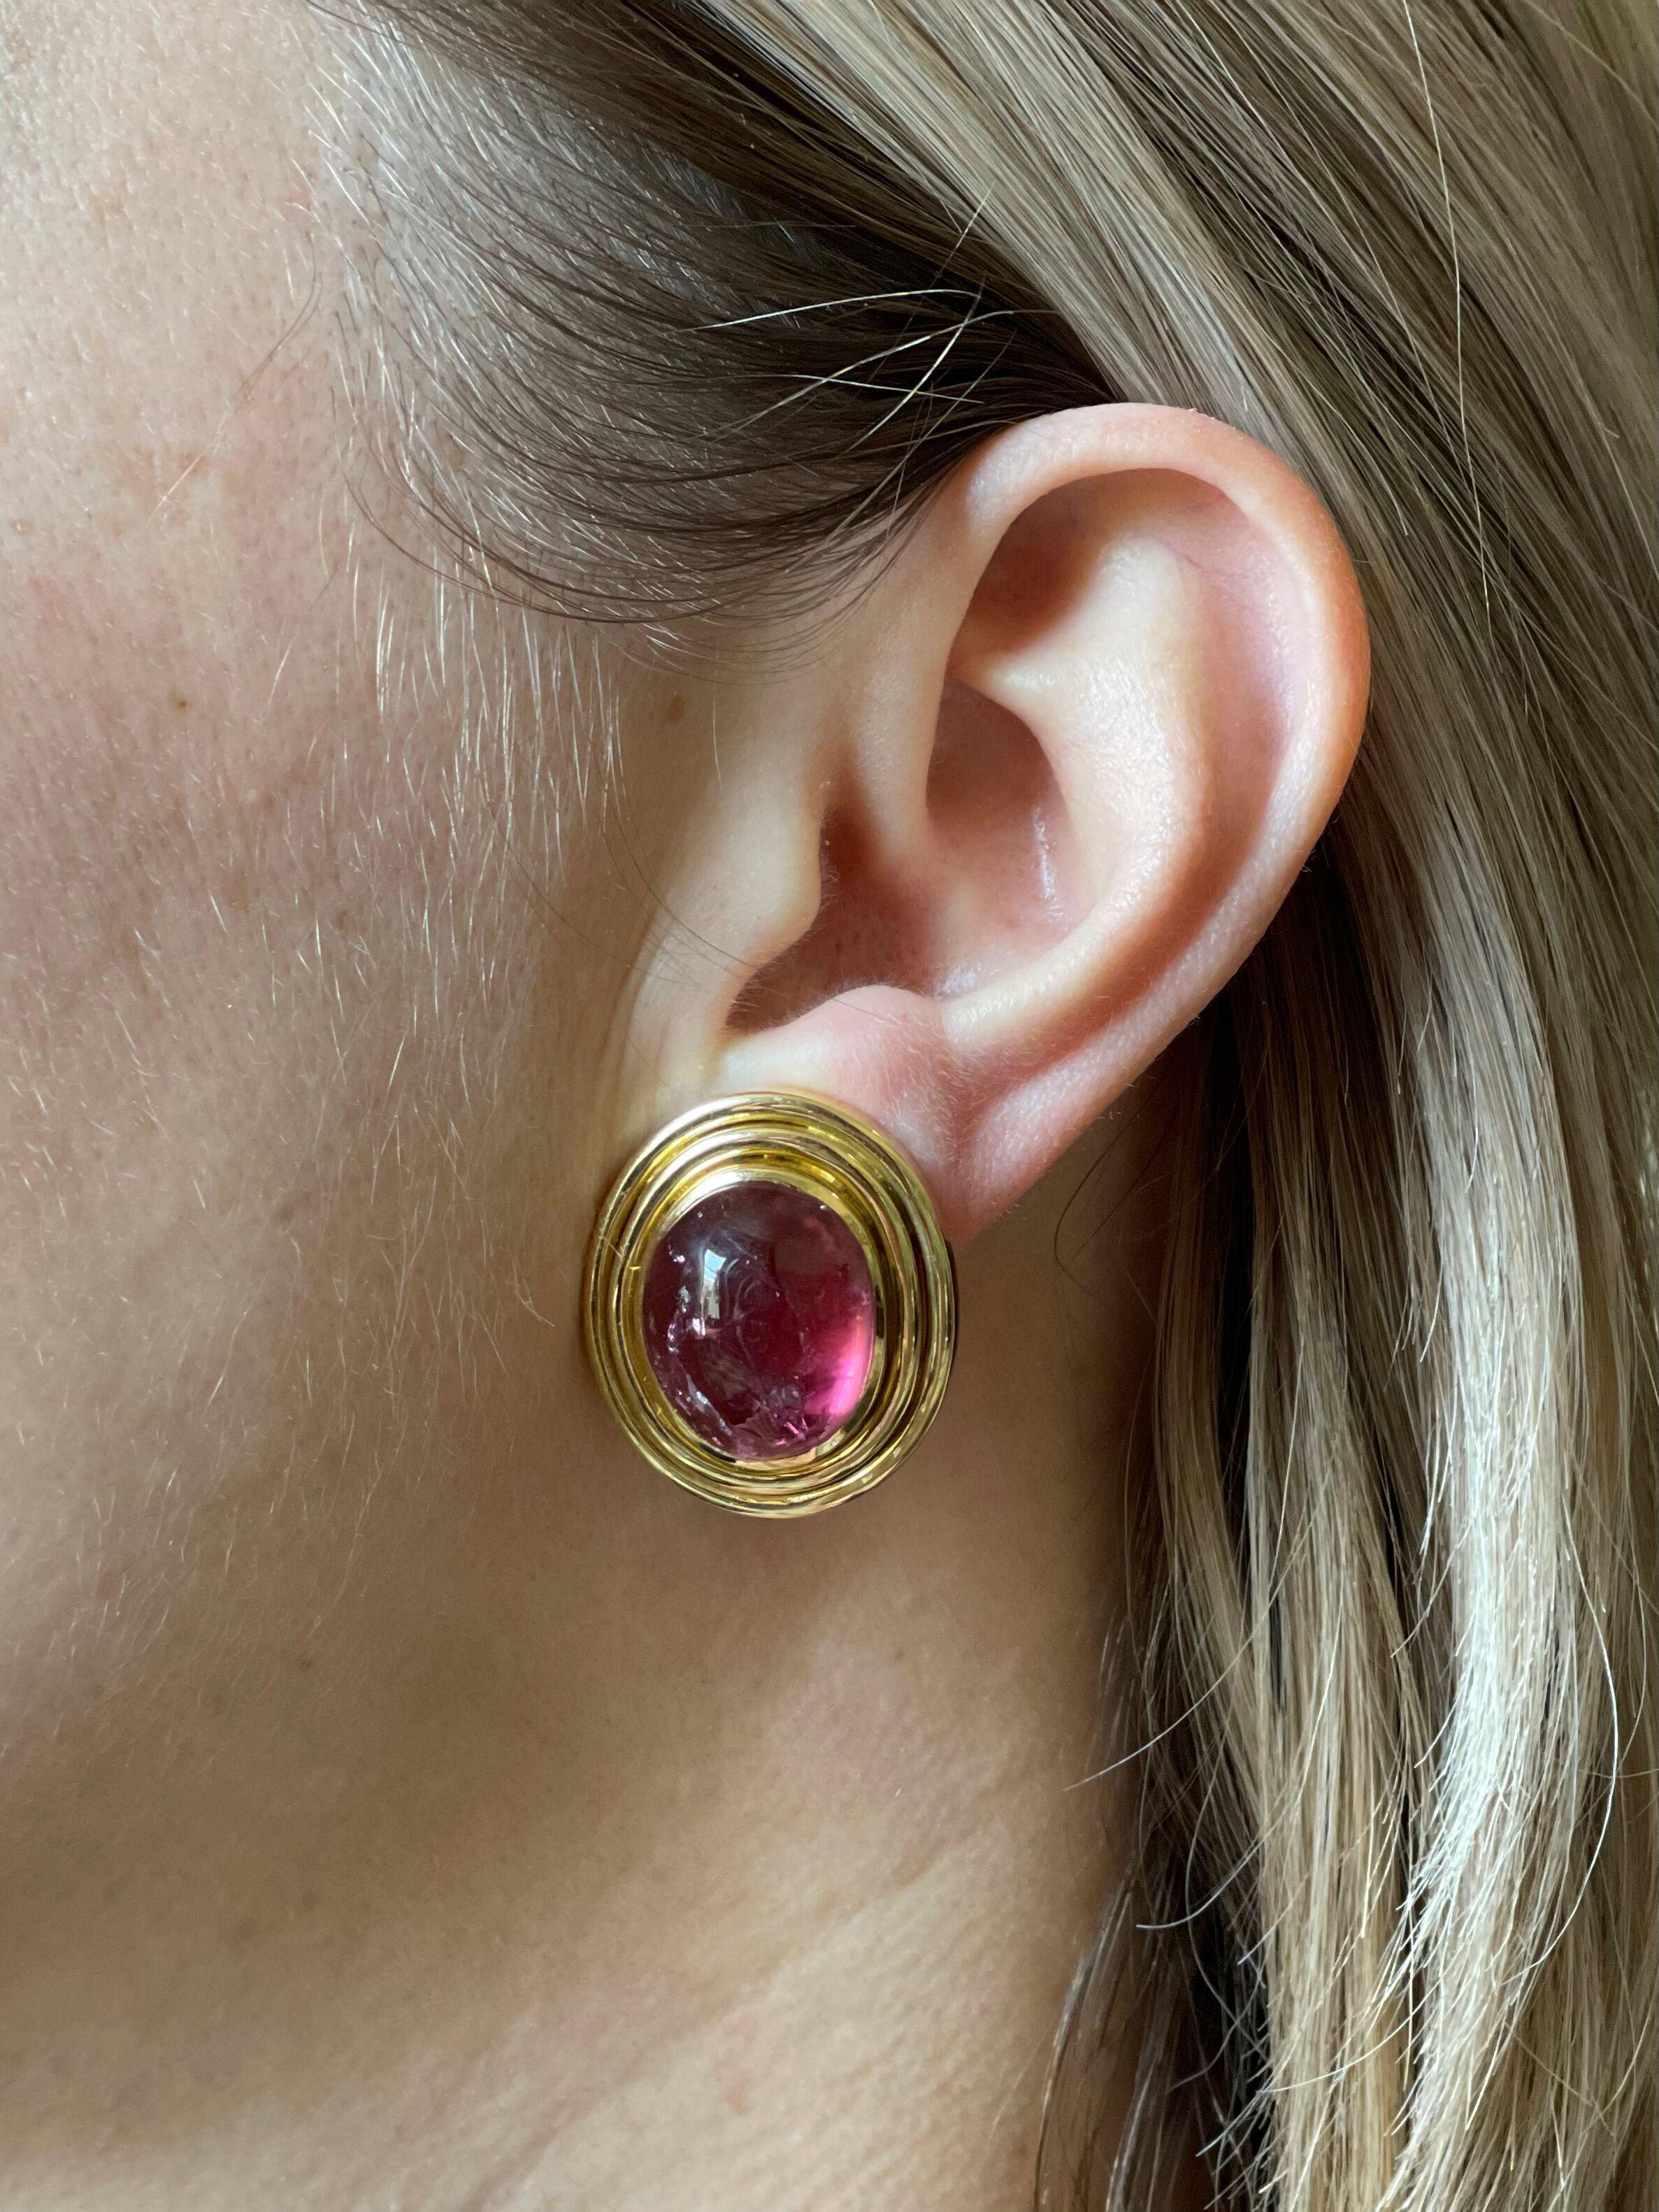 Pair of large 18k gold earrings by Leo de Vroomen, set with two oval pink tourmaline cabochons - measuring approx. 17 x 14 x 10mm each. The earrings are 1 1/16